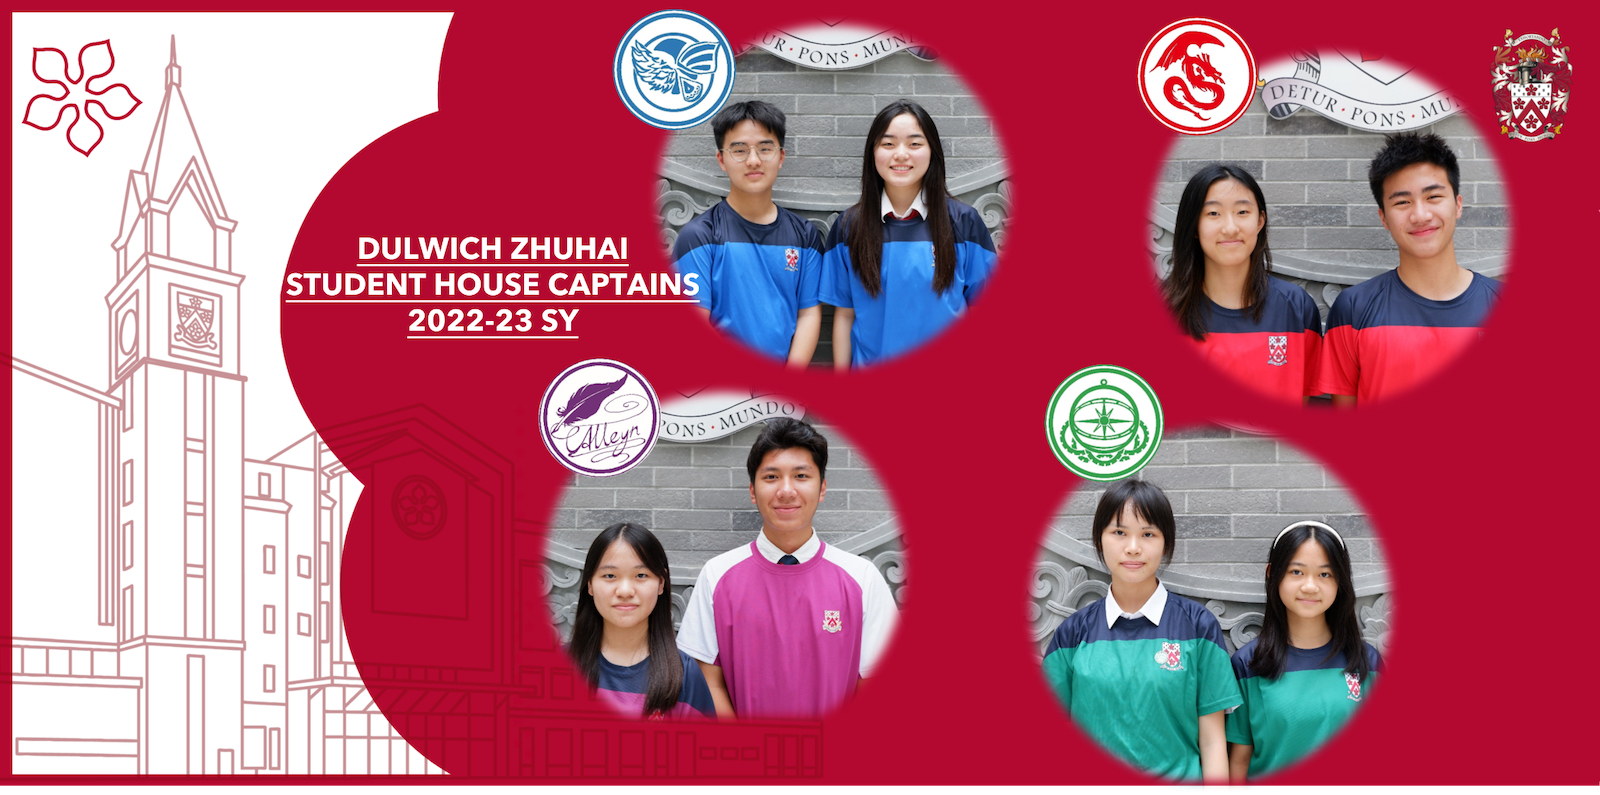 student-house-captains-22-23sy